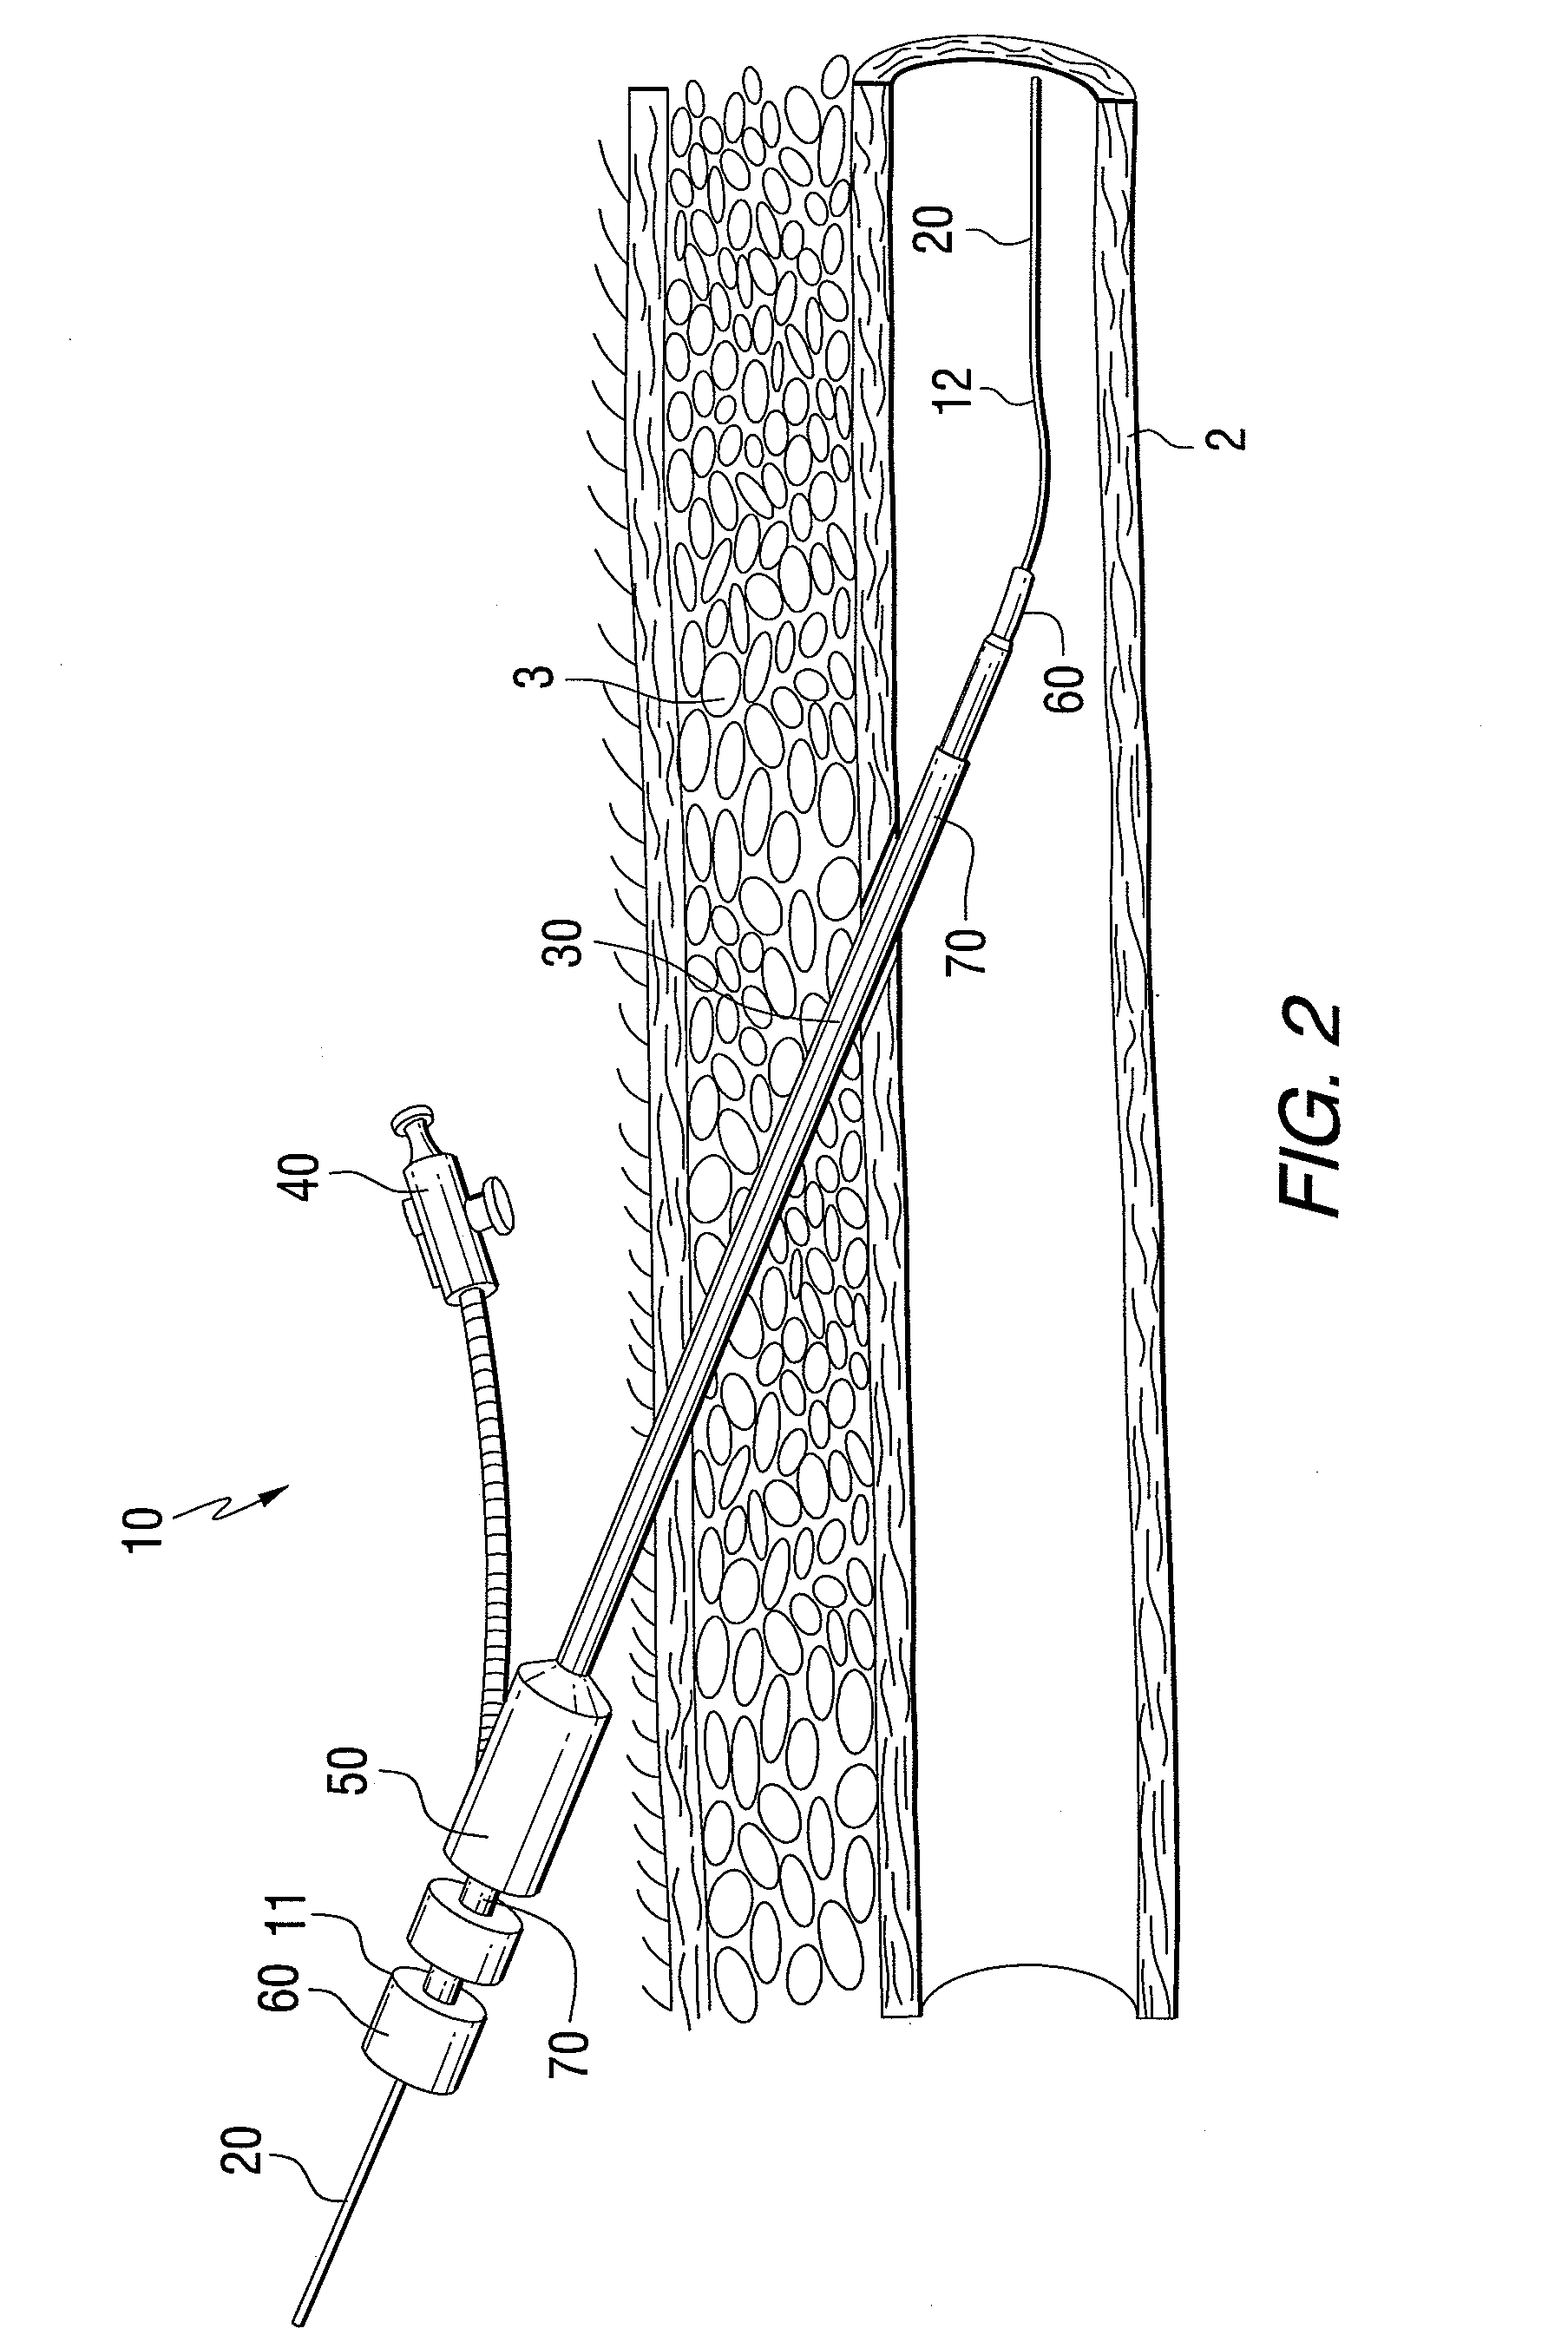 Vascular access device and method